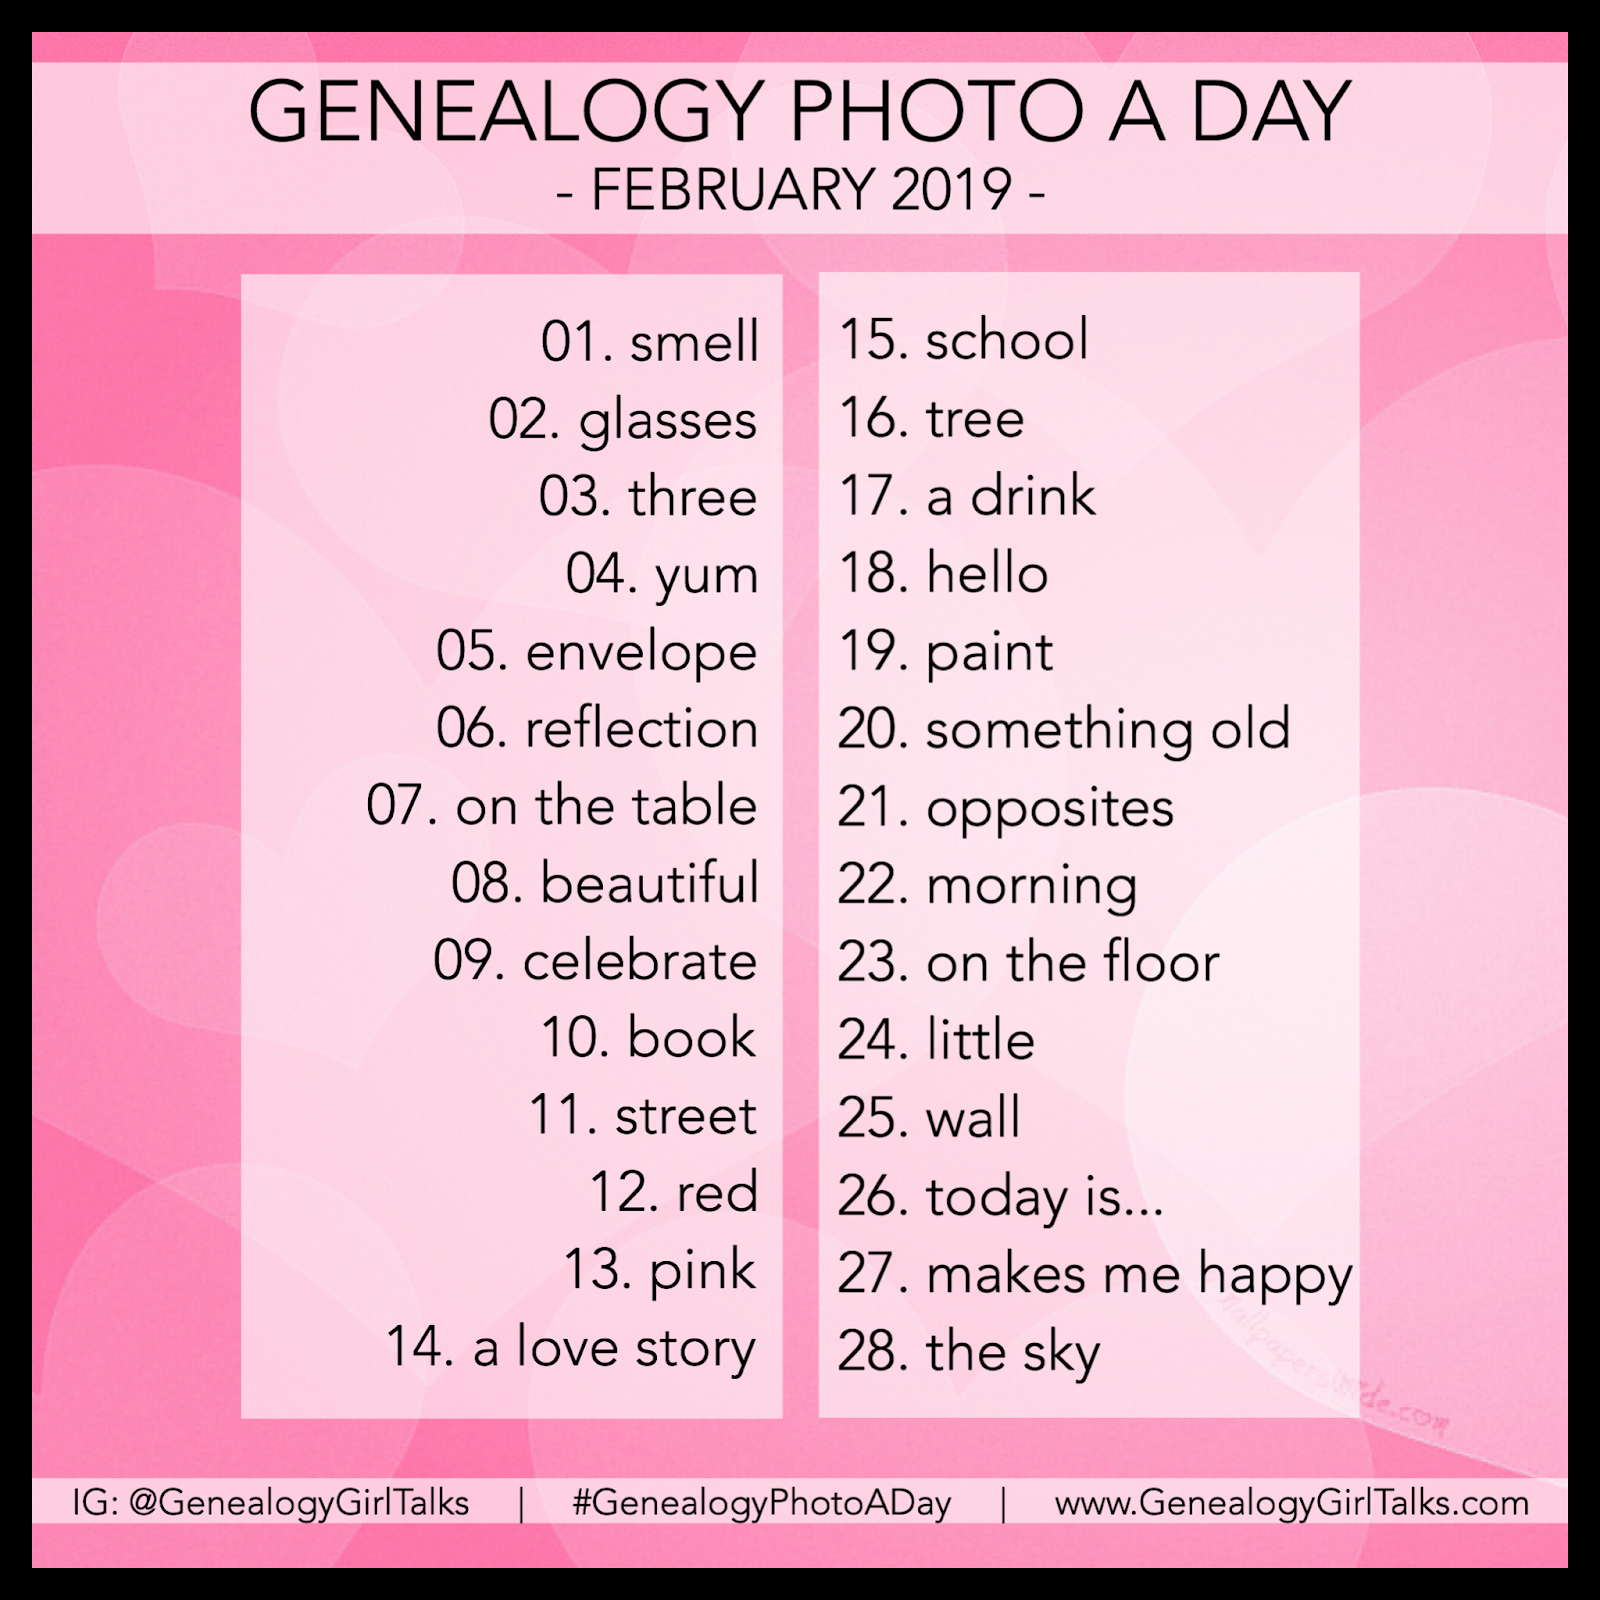 February 2019 Genealogy Photo A Day prompts from Genealogy GIrl Talks - #Genealogy #FamilyHistory #GenealogyPhotoADay #GenealogyGirlTalks